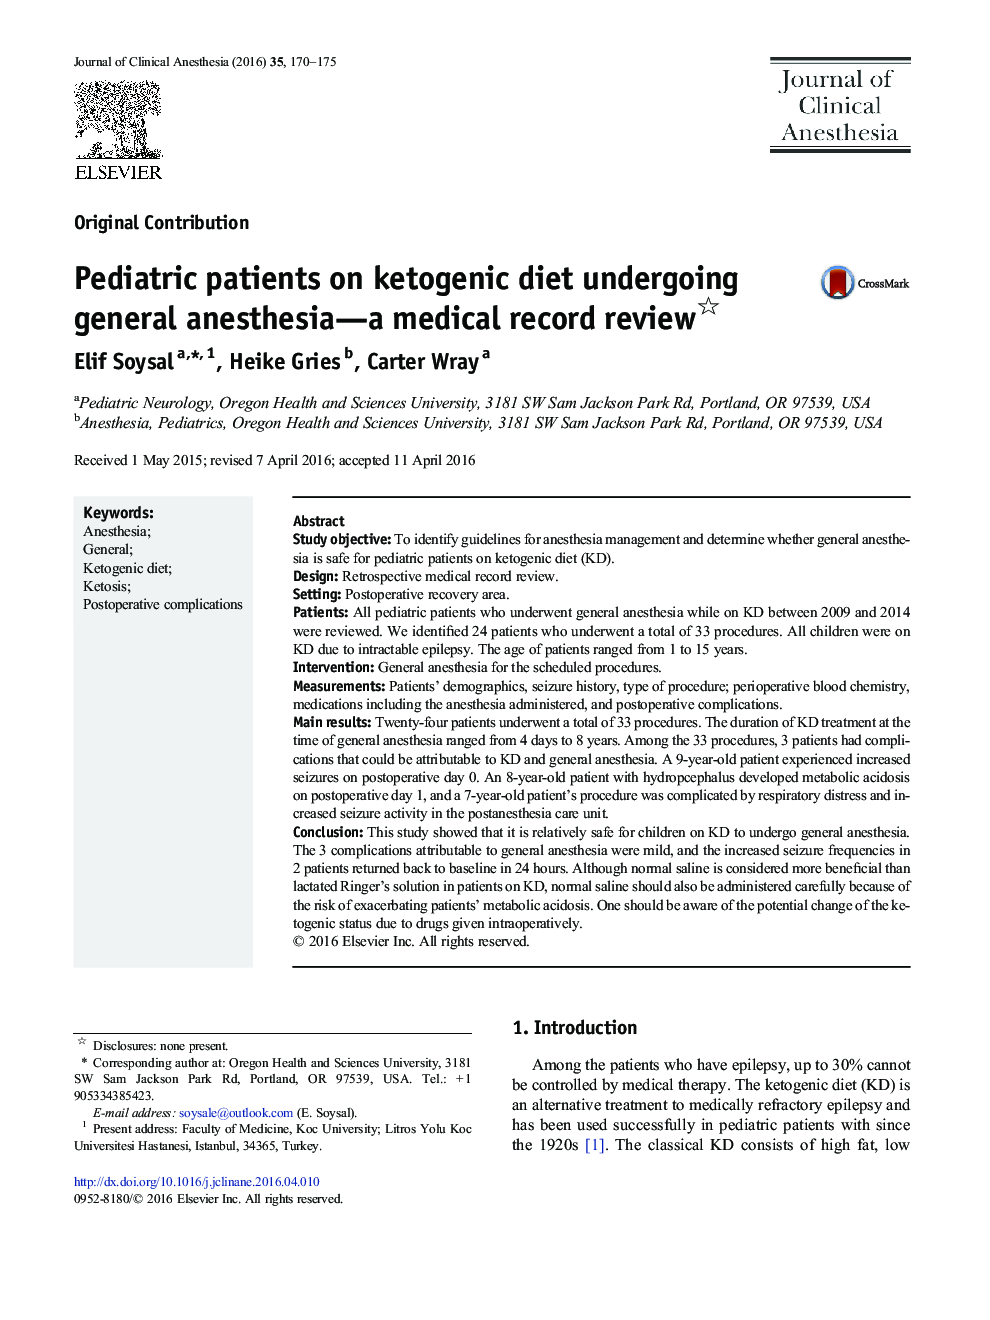 Original ContributionPediatric patients on ketogenic diet undergoing general anesthesia-a medical record review